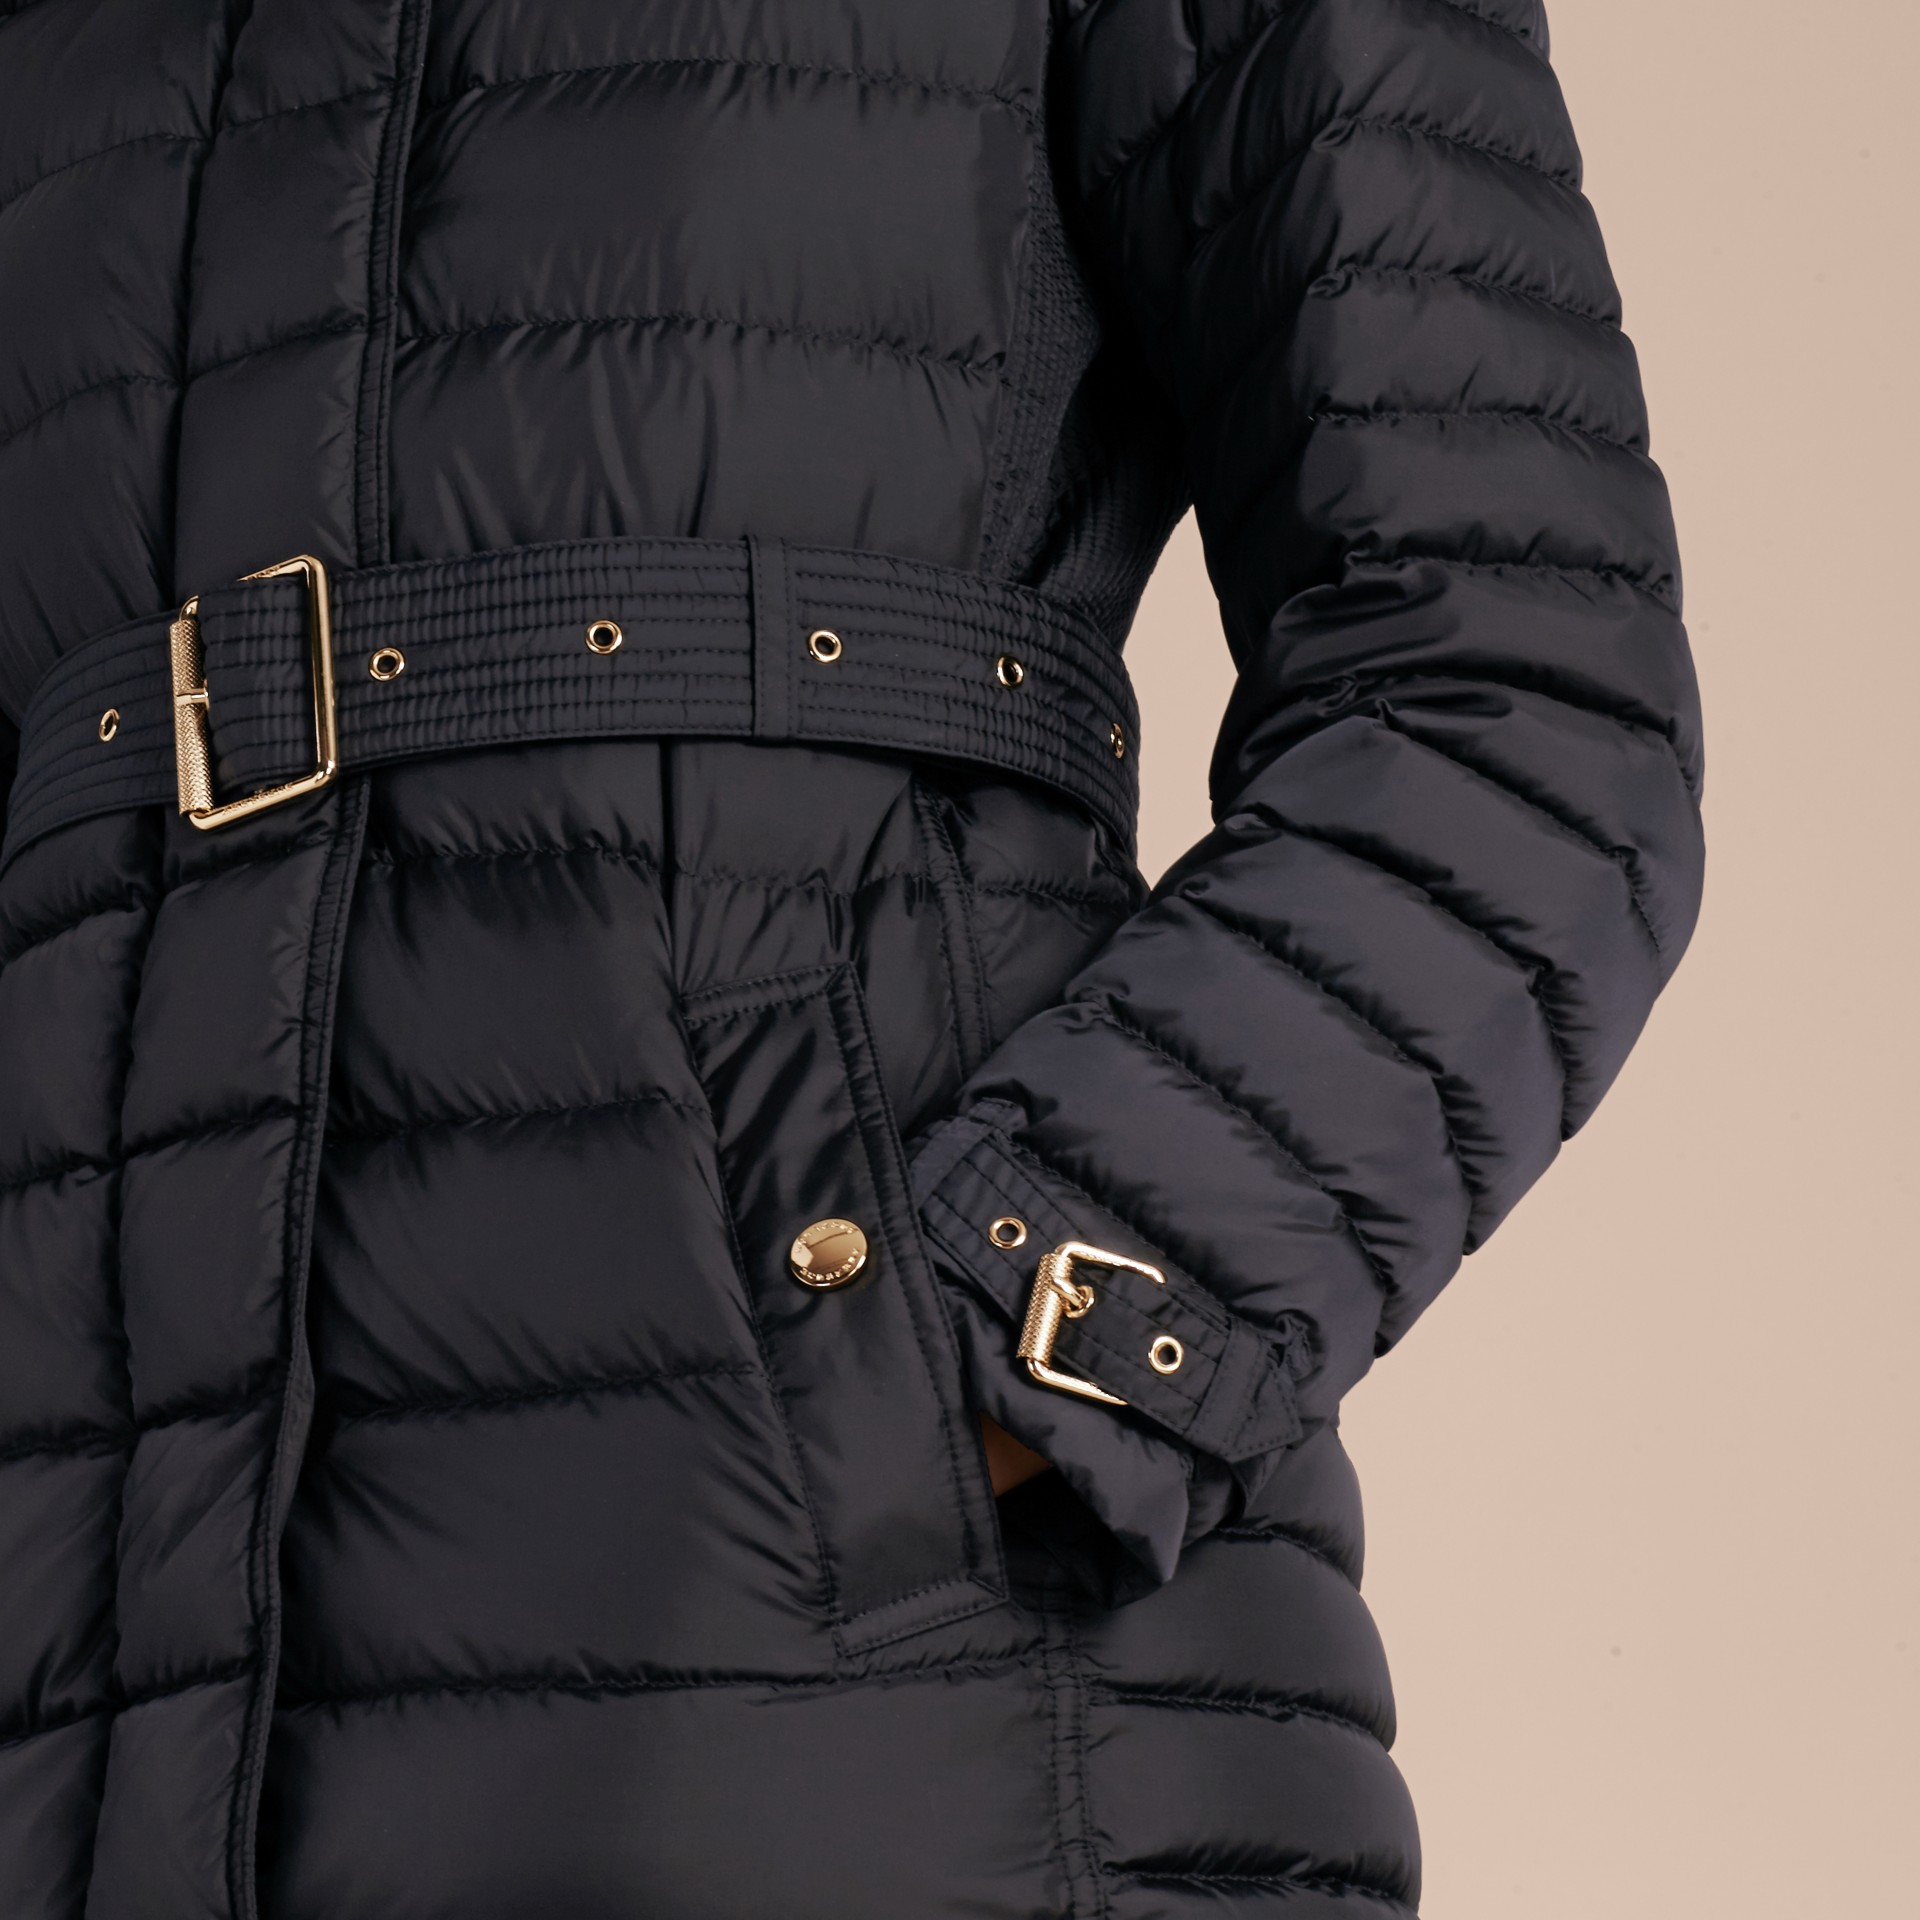 Down-filled Puffer Jacket with Packaway Hood in Navy - Women | Burberry